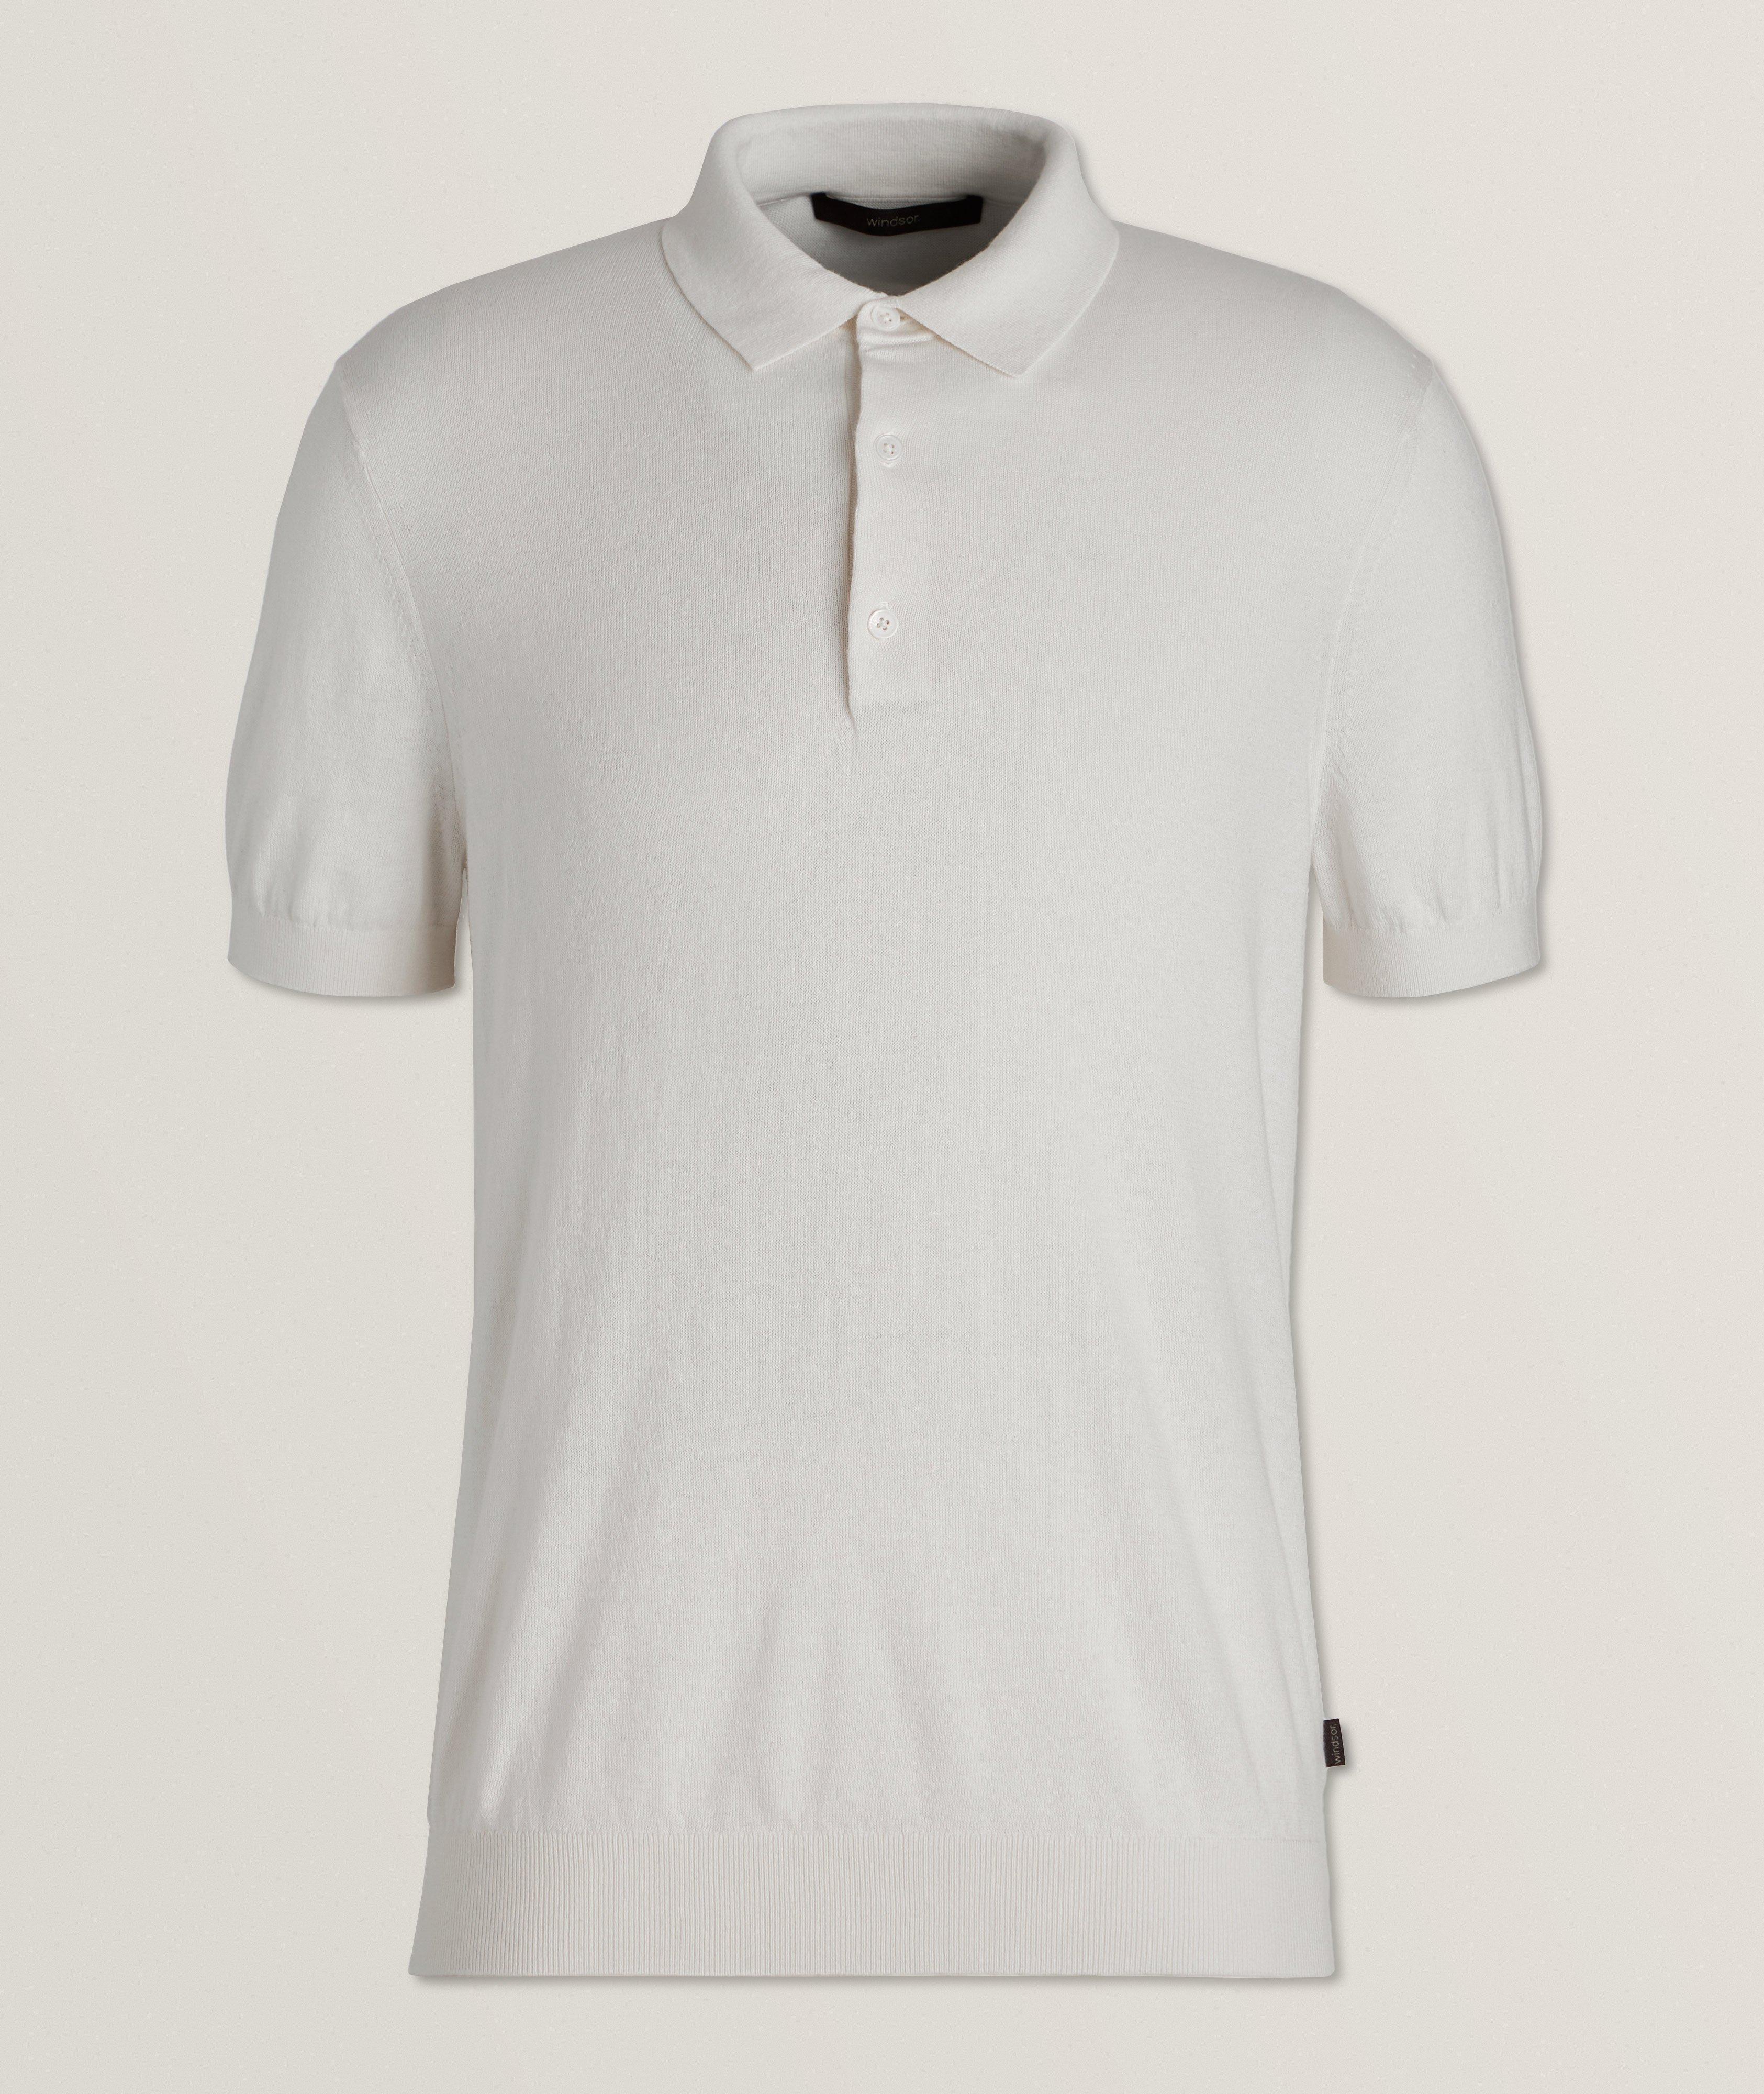 Windsor Cashmino Cashmere-Cotton Knitted Polo